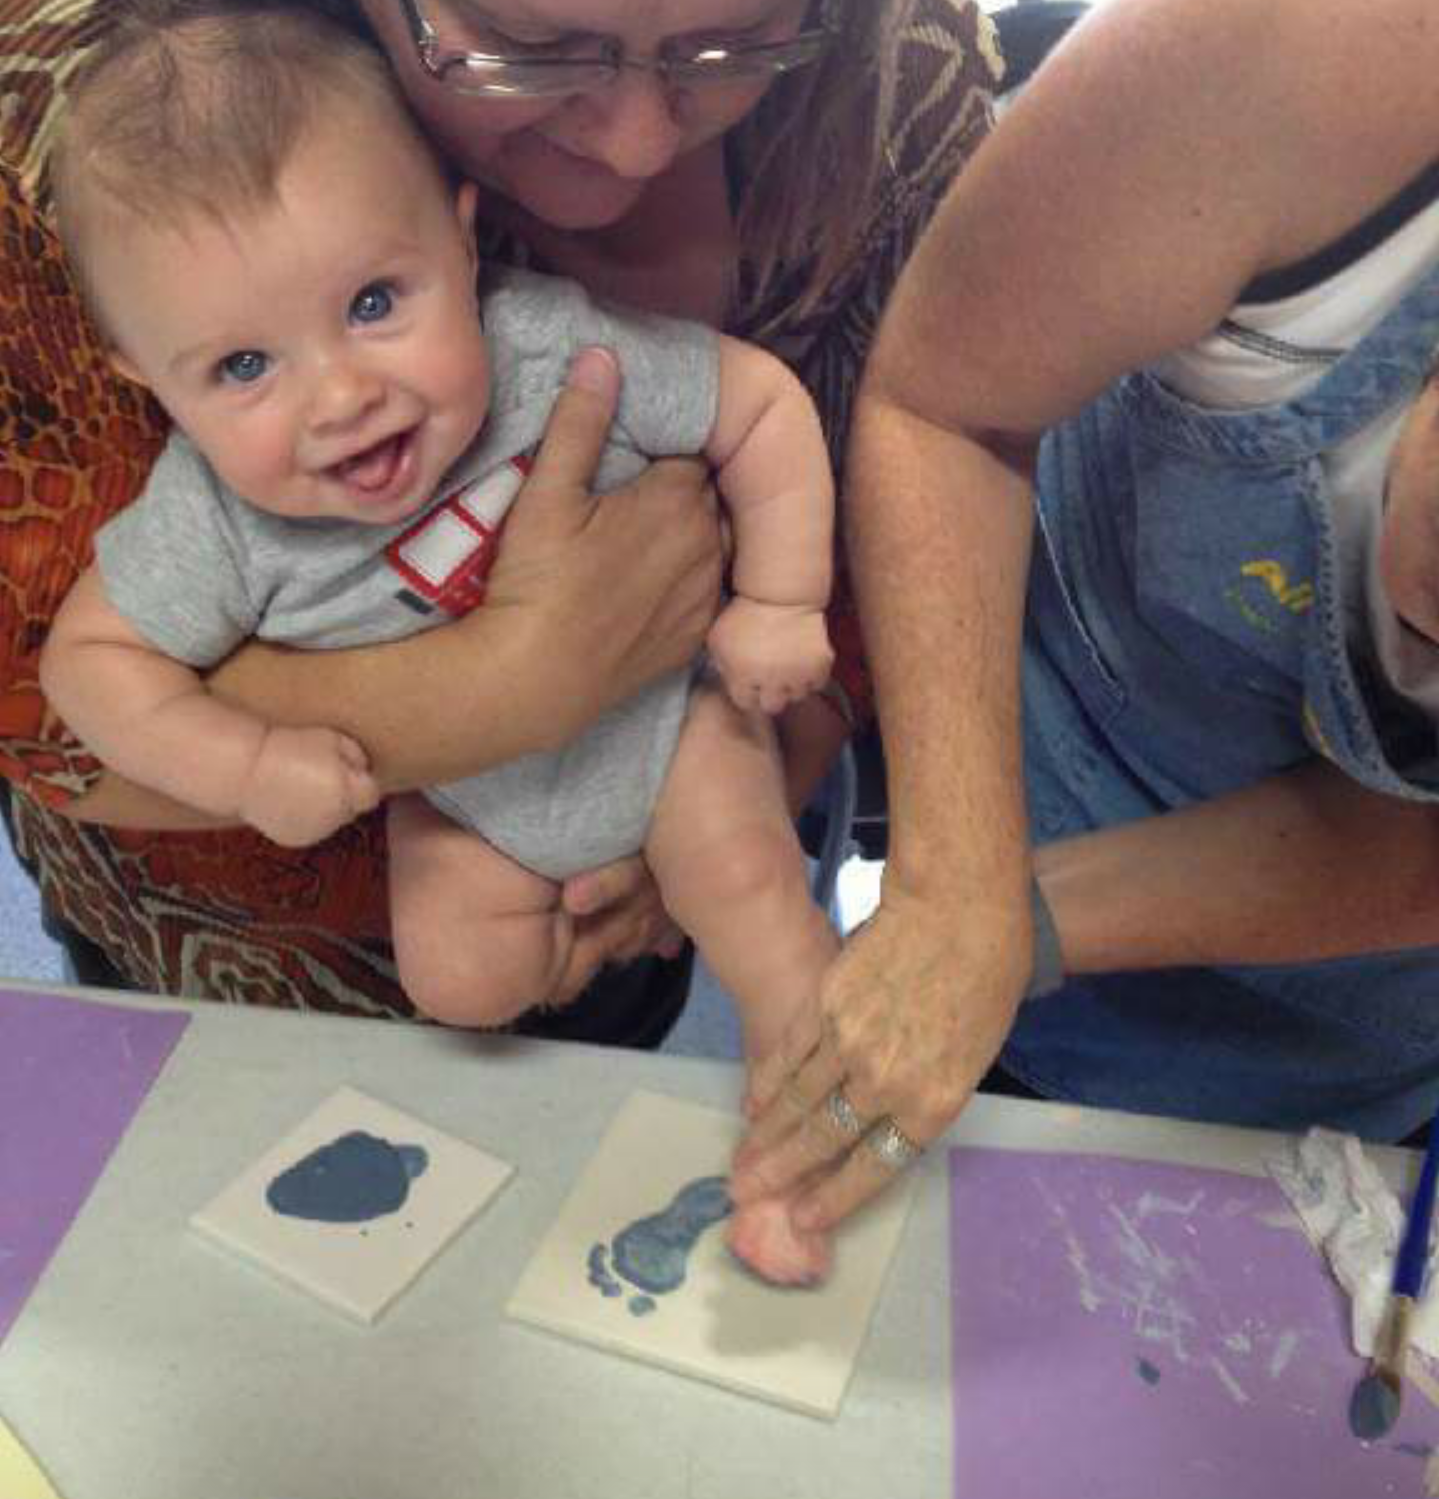 A woman holding a baby while they paint.